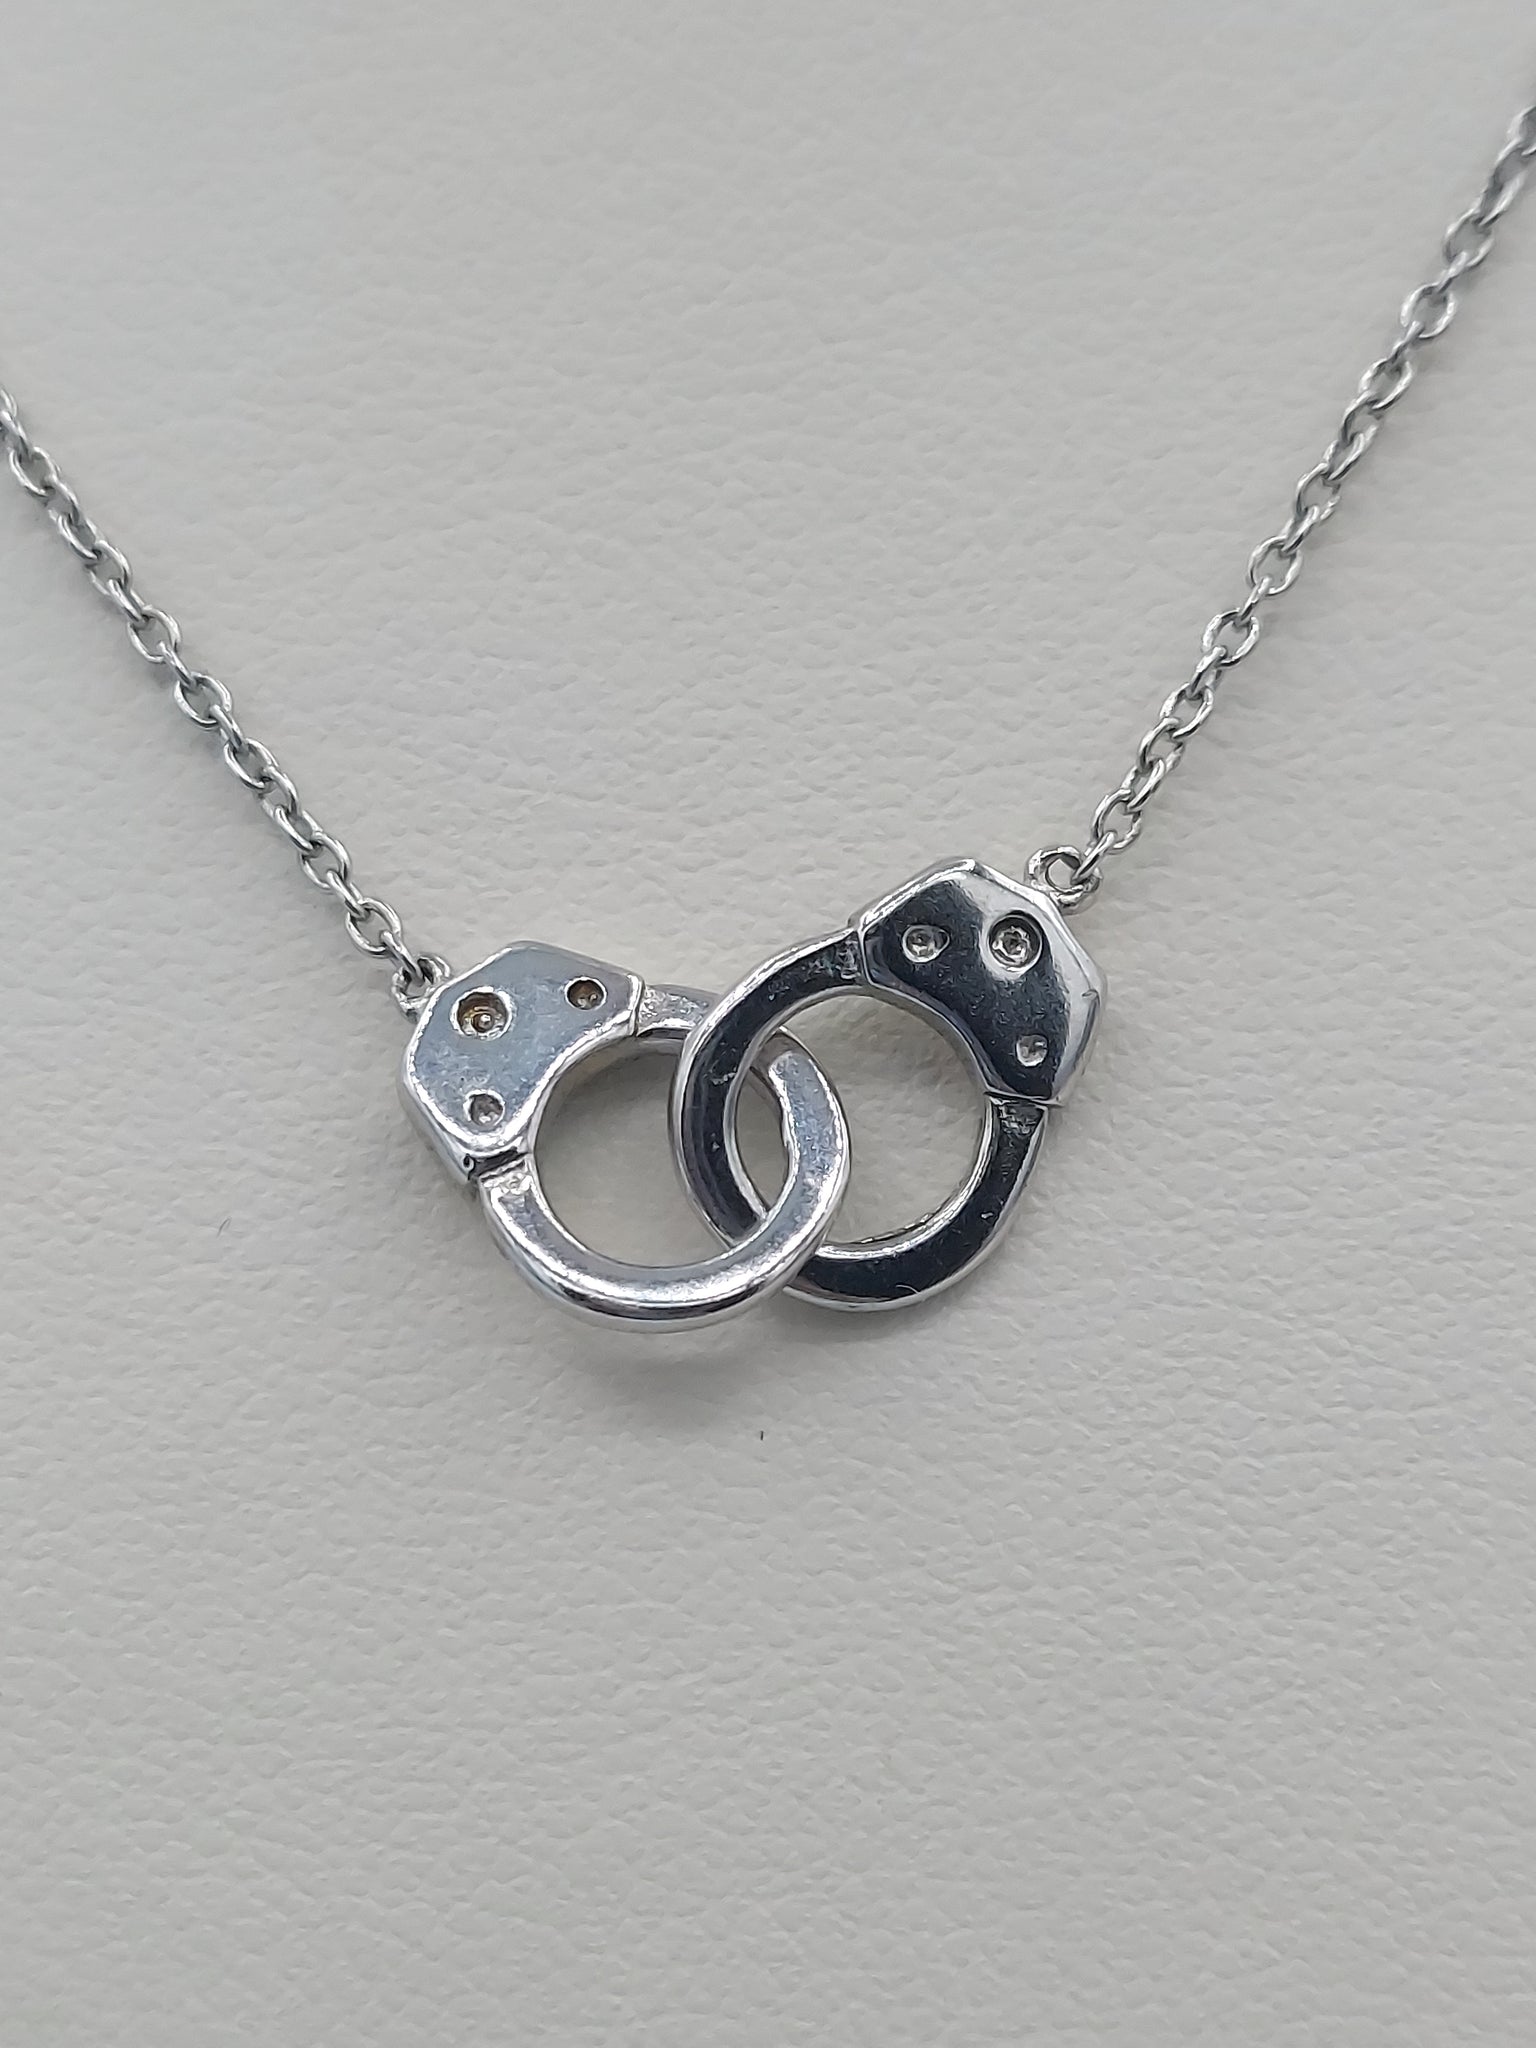 Handcuff Necklace - Sterling Silver – Marie's Jewelry Store